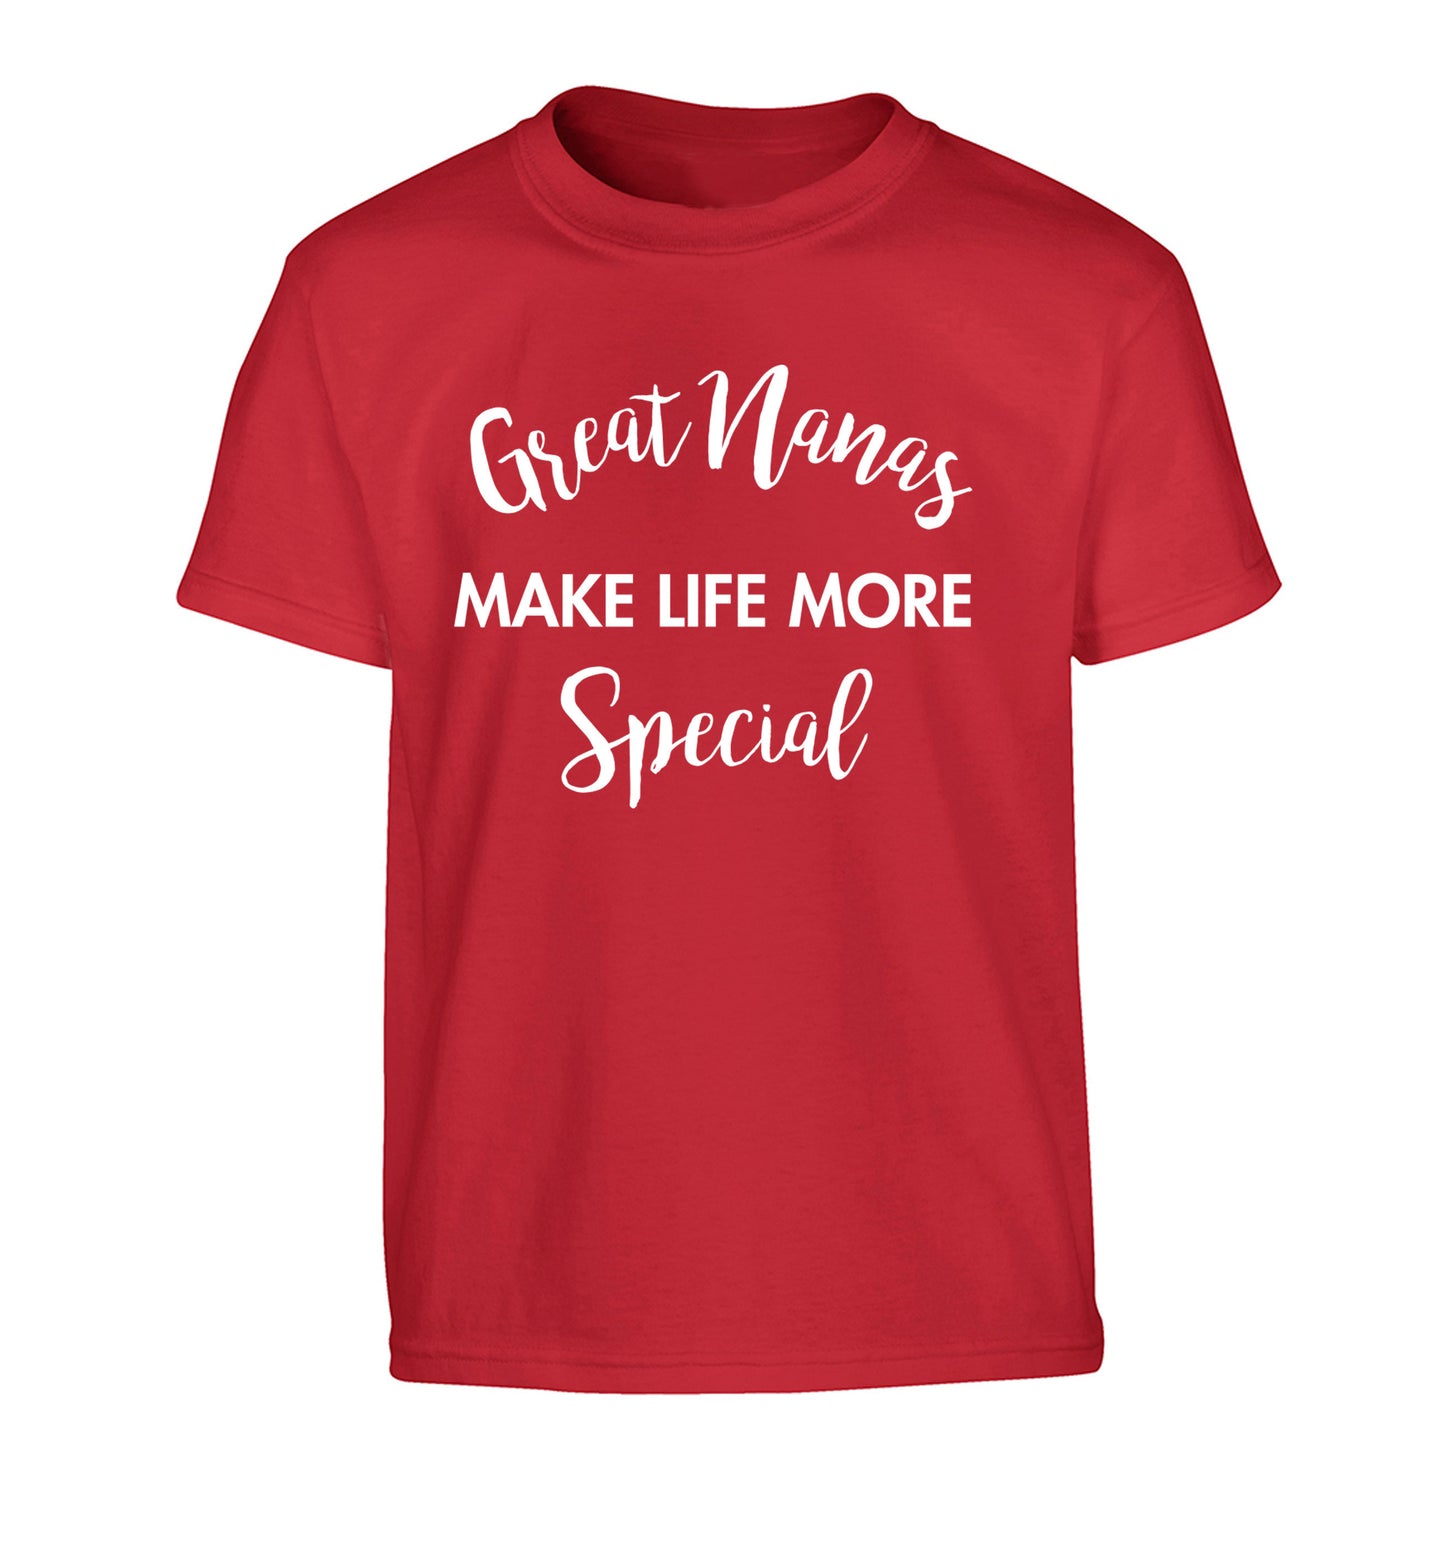 Great nanas make life more special Children's red Tshirt 12-14 Years